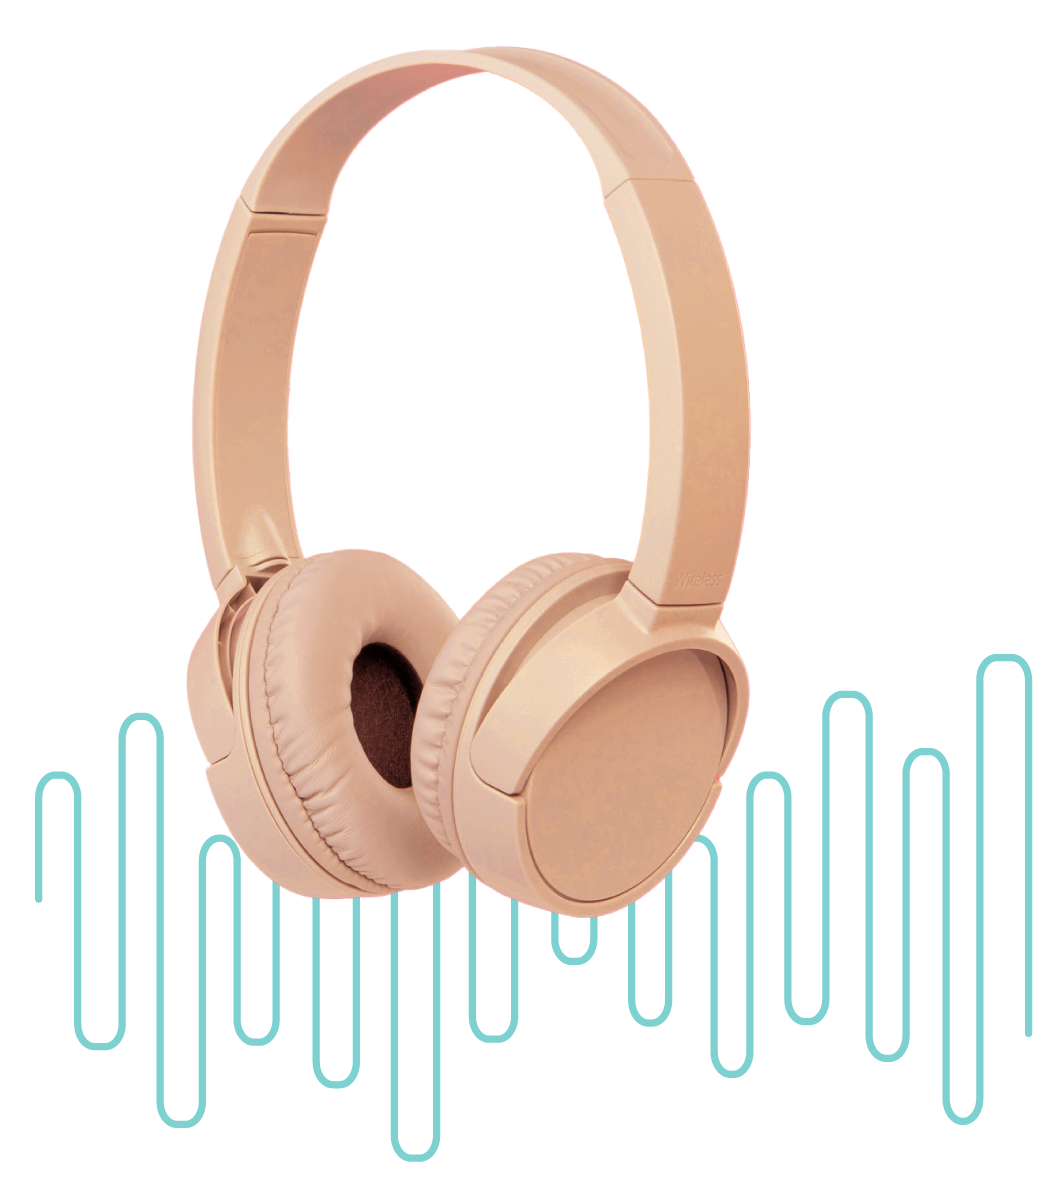 set of over-the-ears headphones with an audiogram behind it